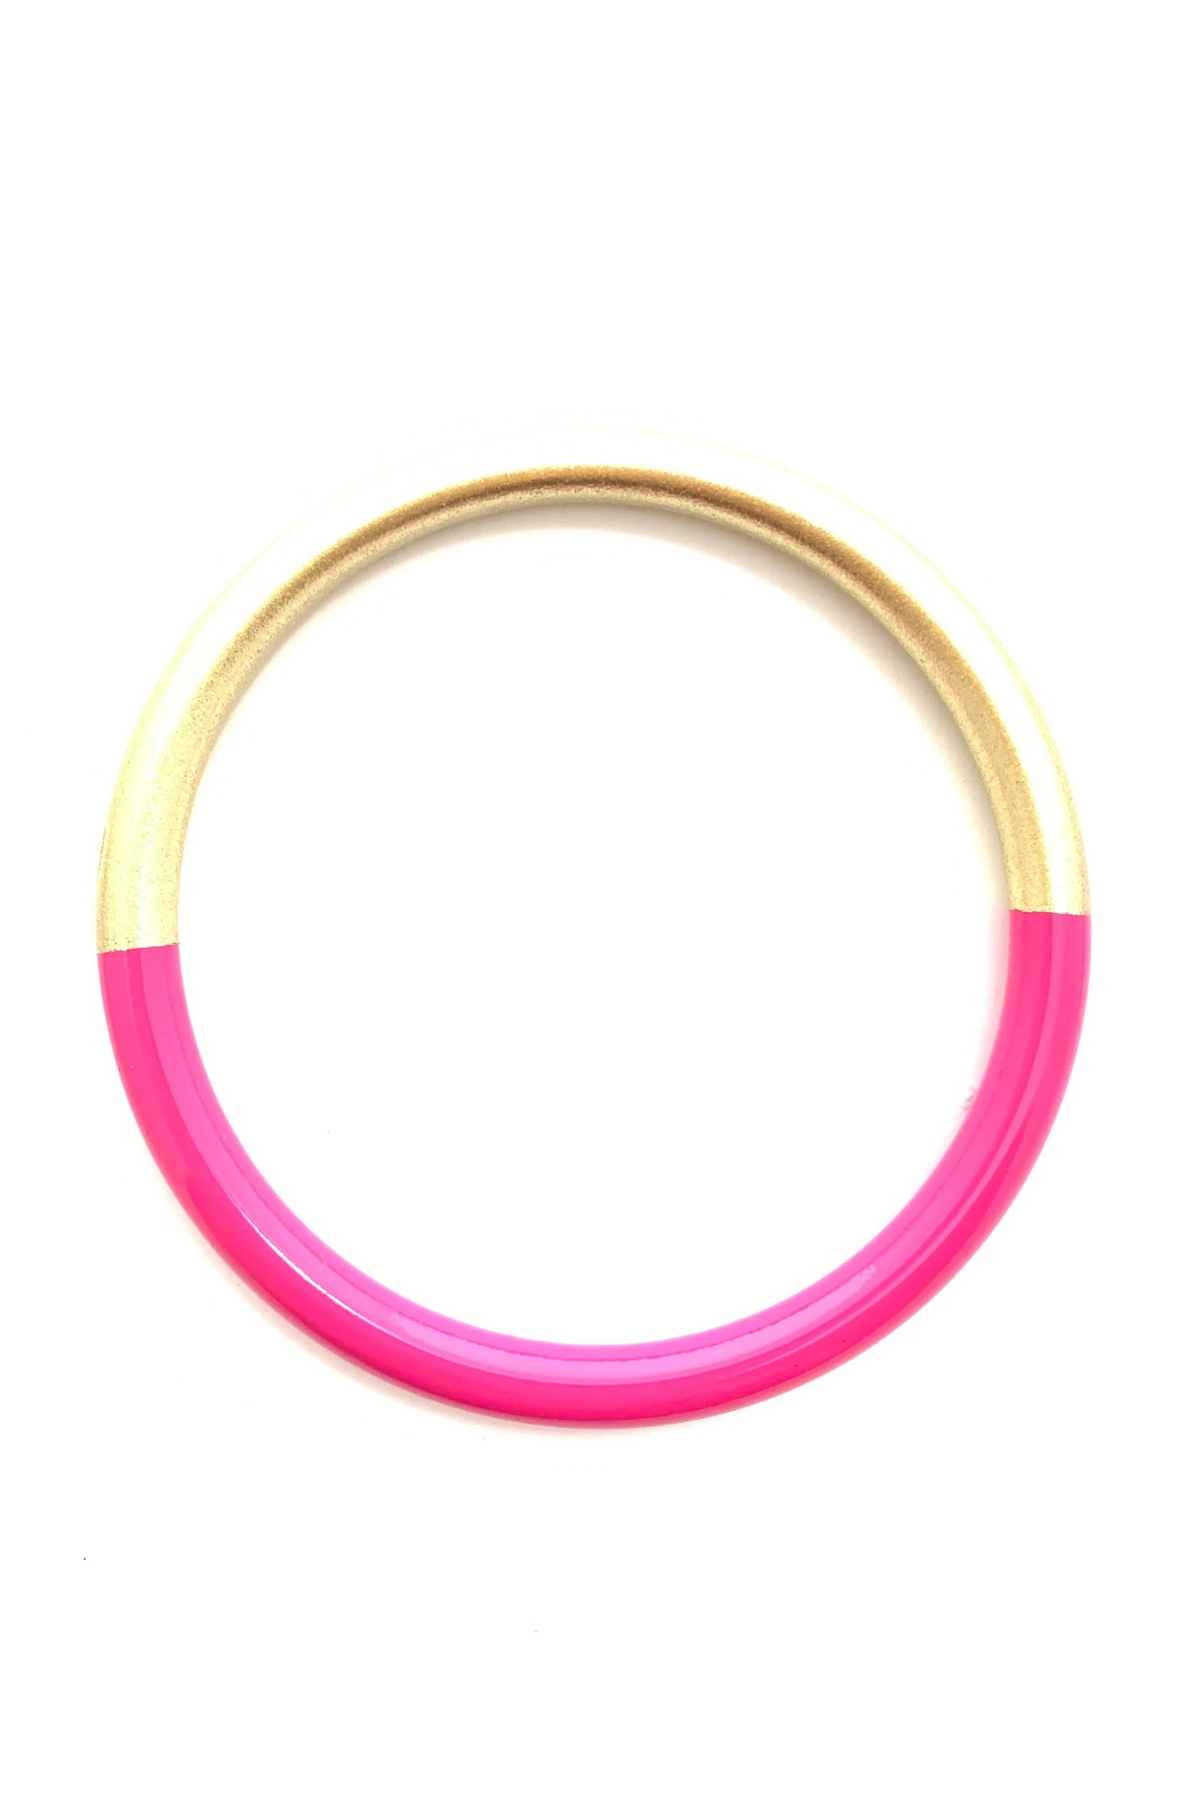 Accessories By Jane Bangle - Hot Pink